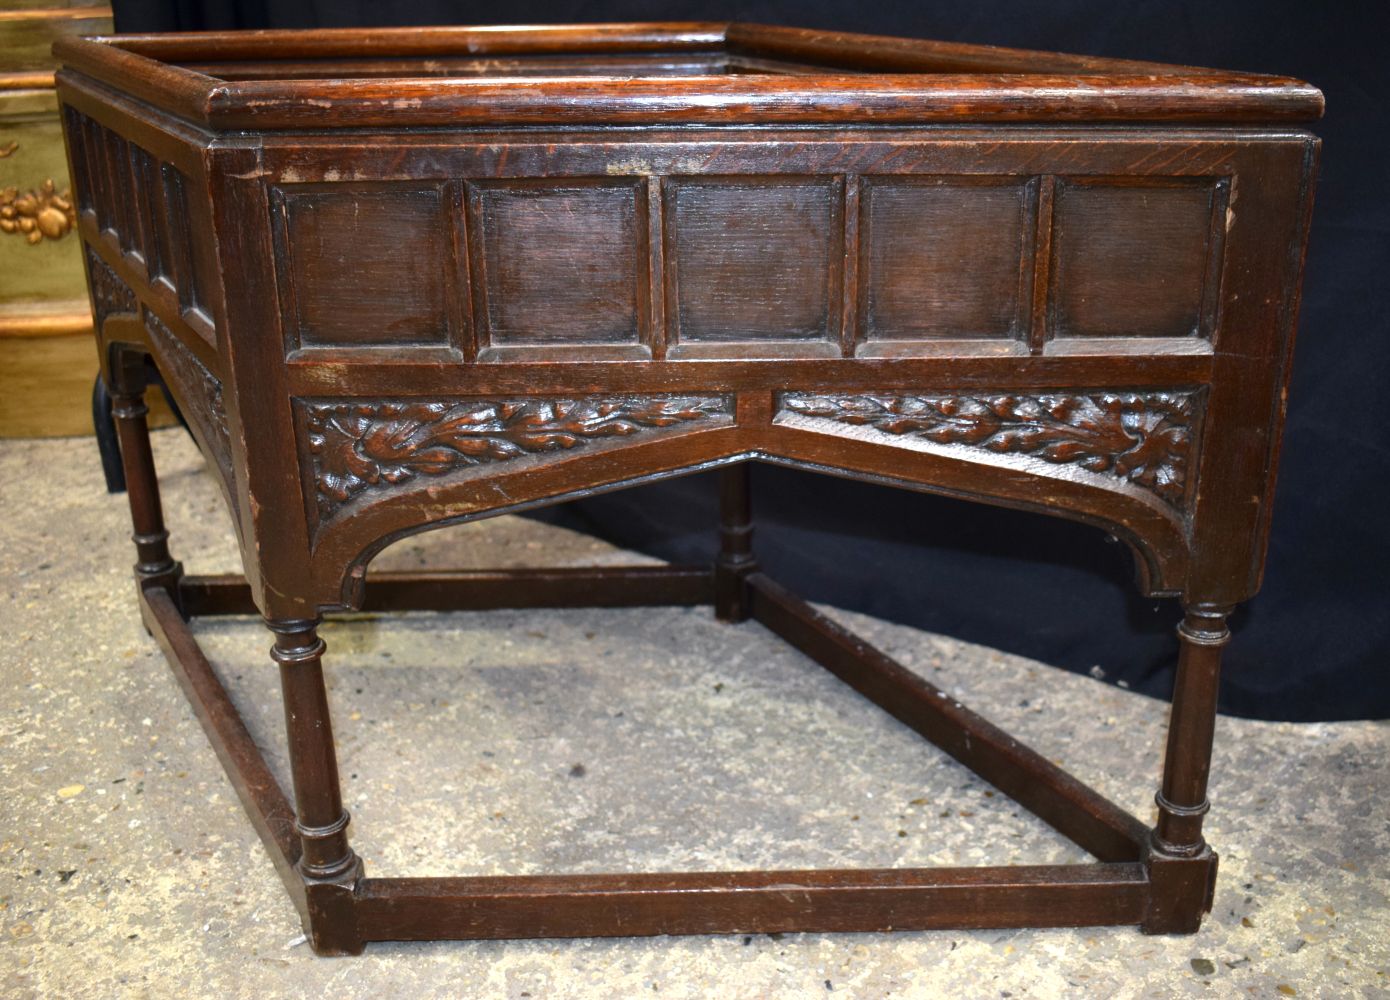 An unusual 19th Century Rhombus shaped carved mahogany planter 57 x 104 x 60 cm - Image 6 of 8